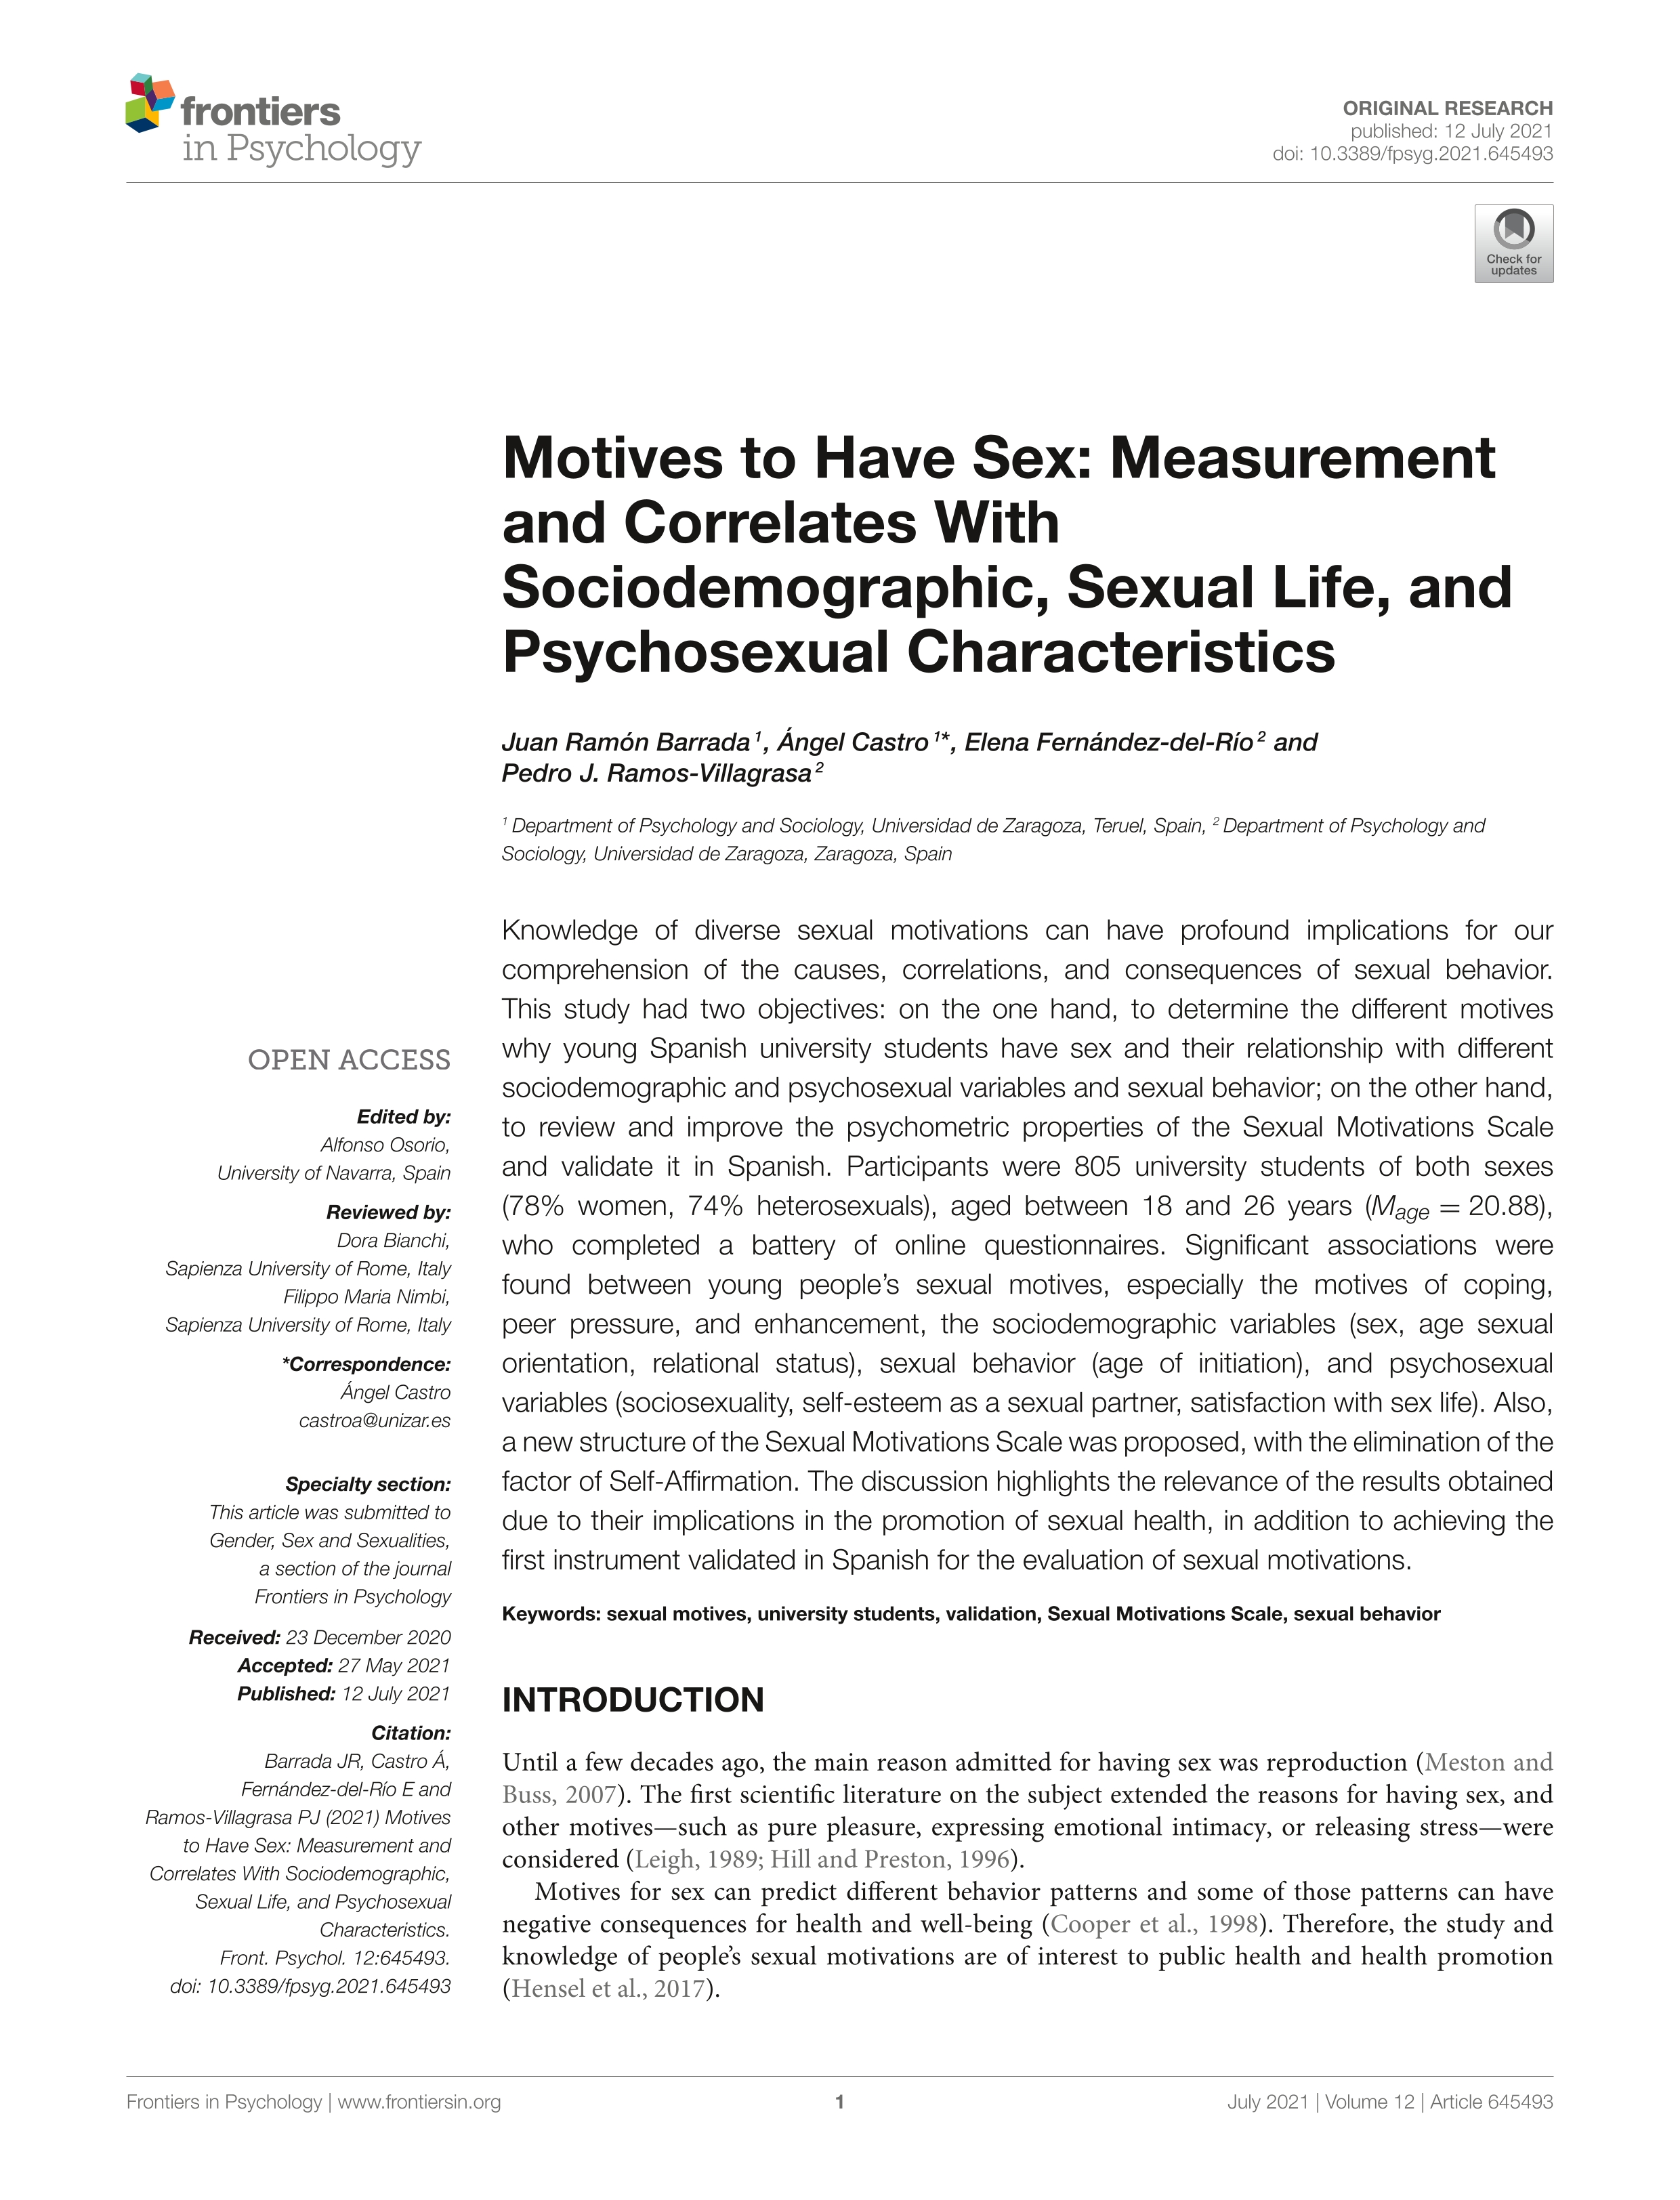 Motives to Have Sex: Measurement and Correlates With Sociodemographic, Sexual Life, and Psychosexual Characteristics